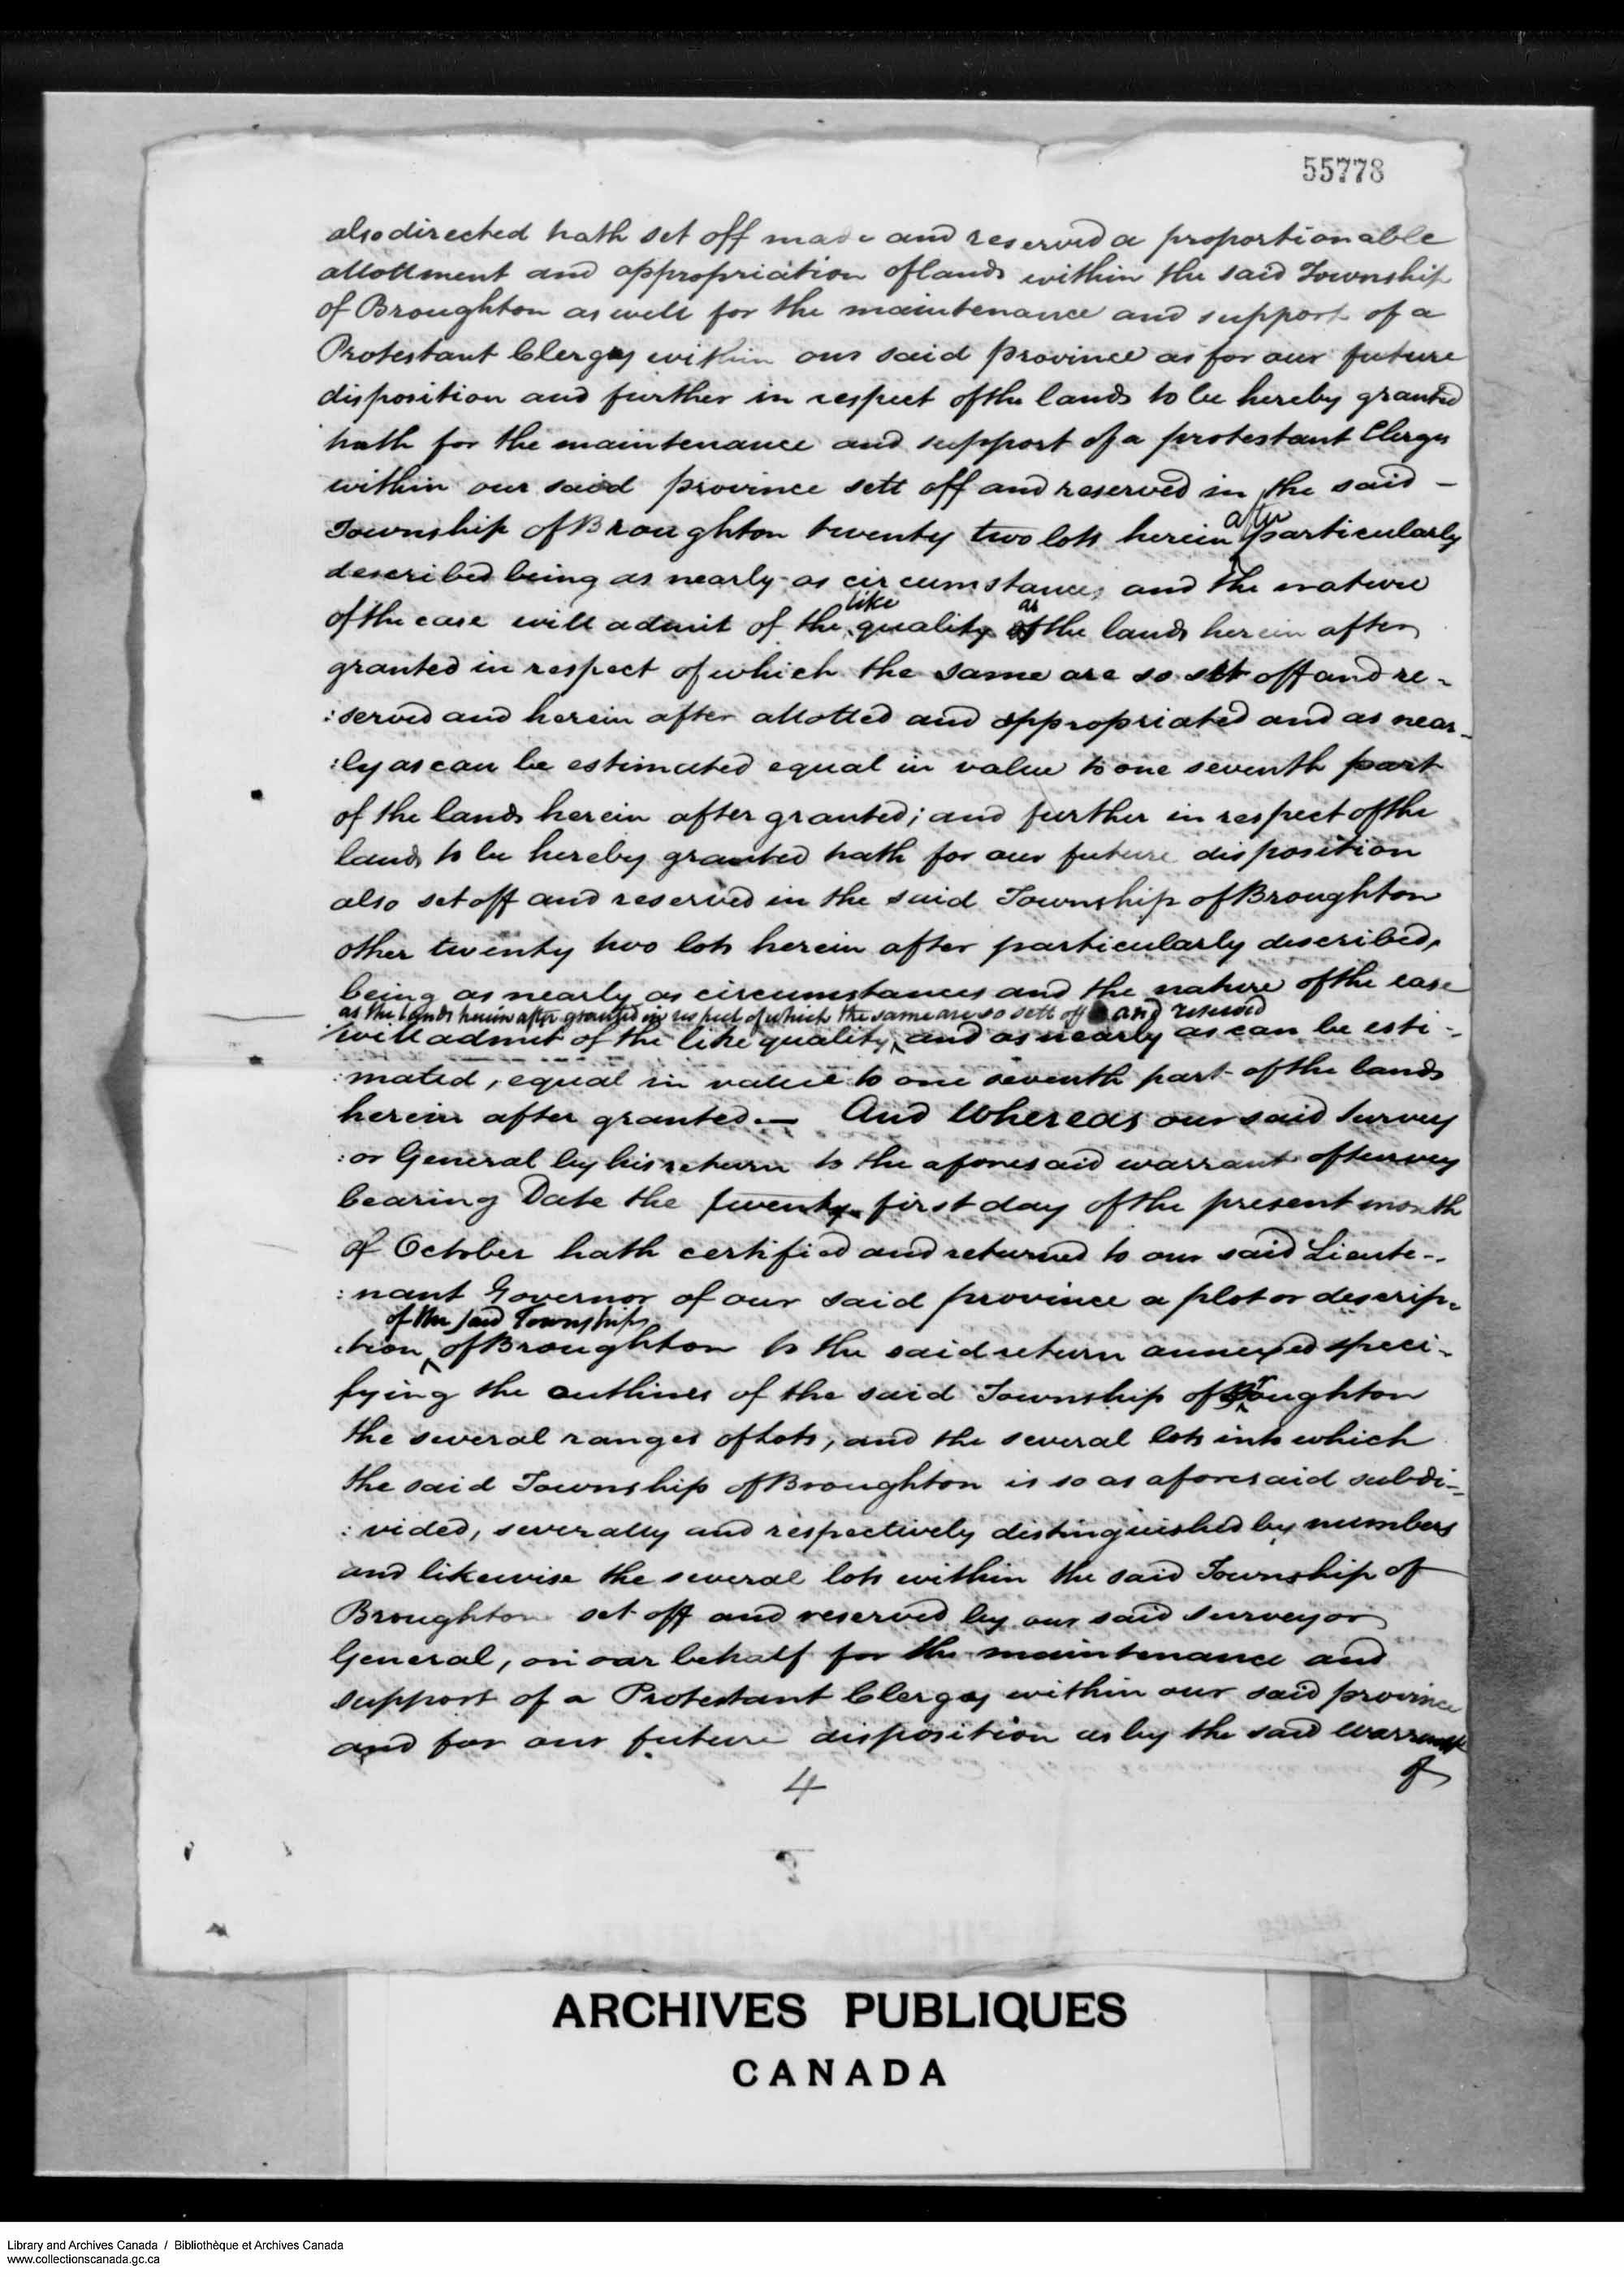 Digitized page of  for Image No.: e008700266